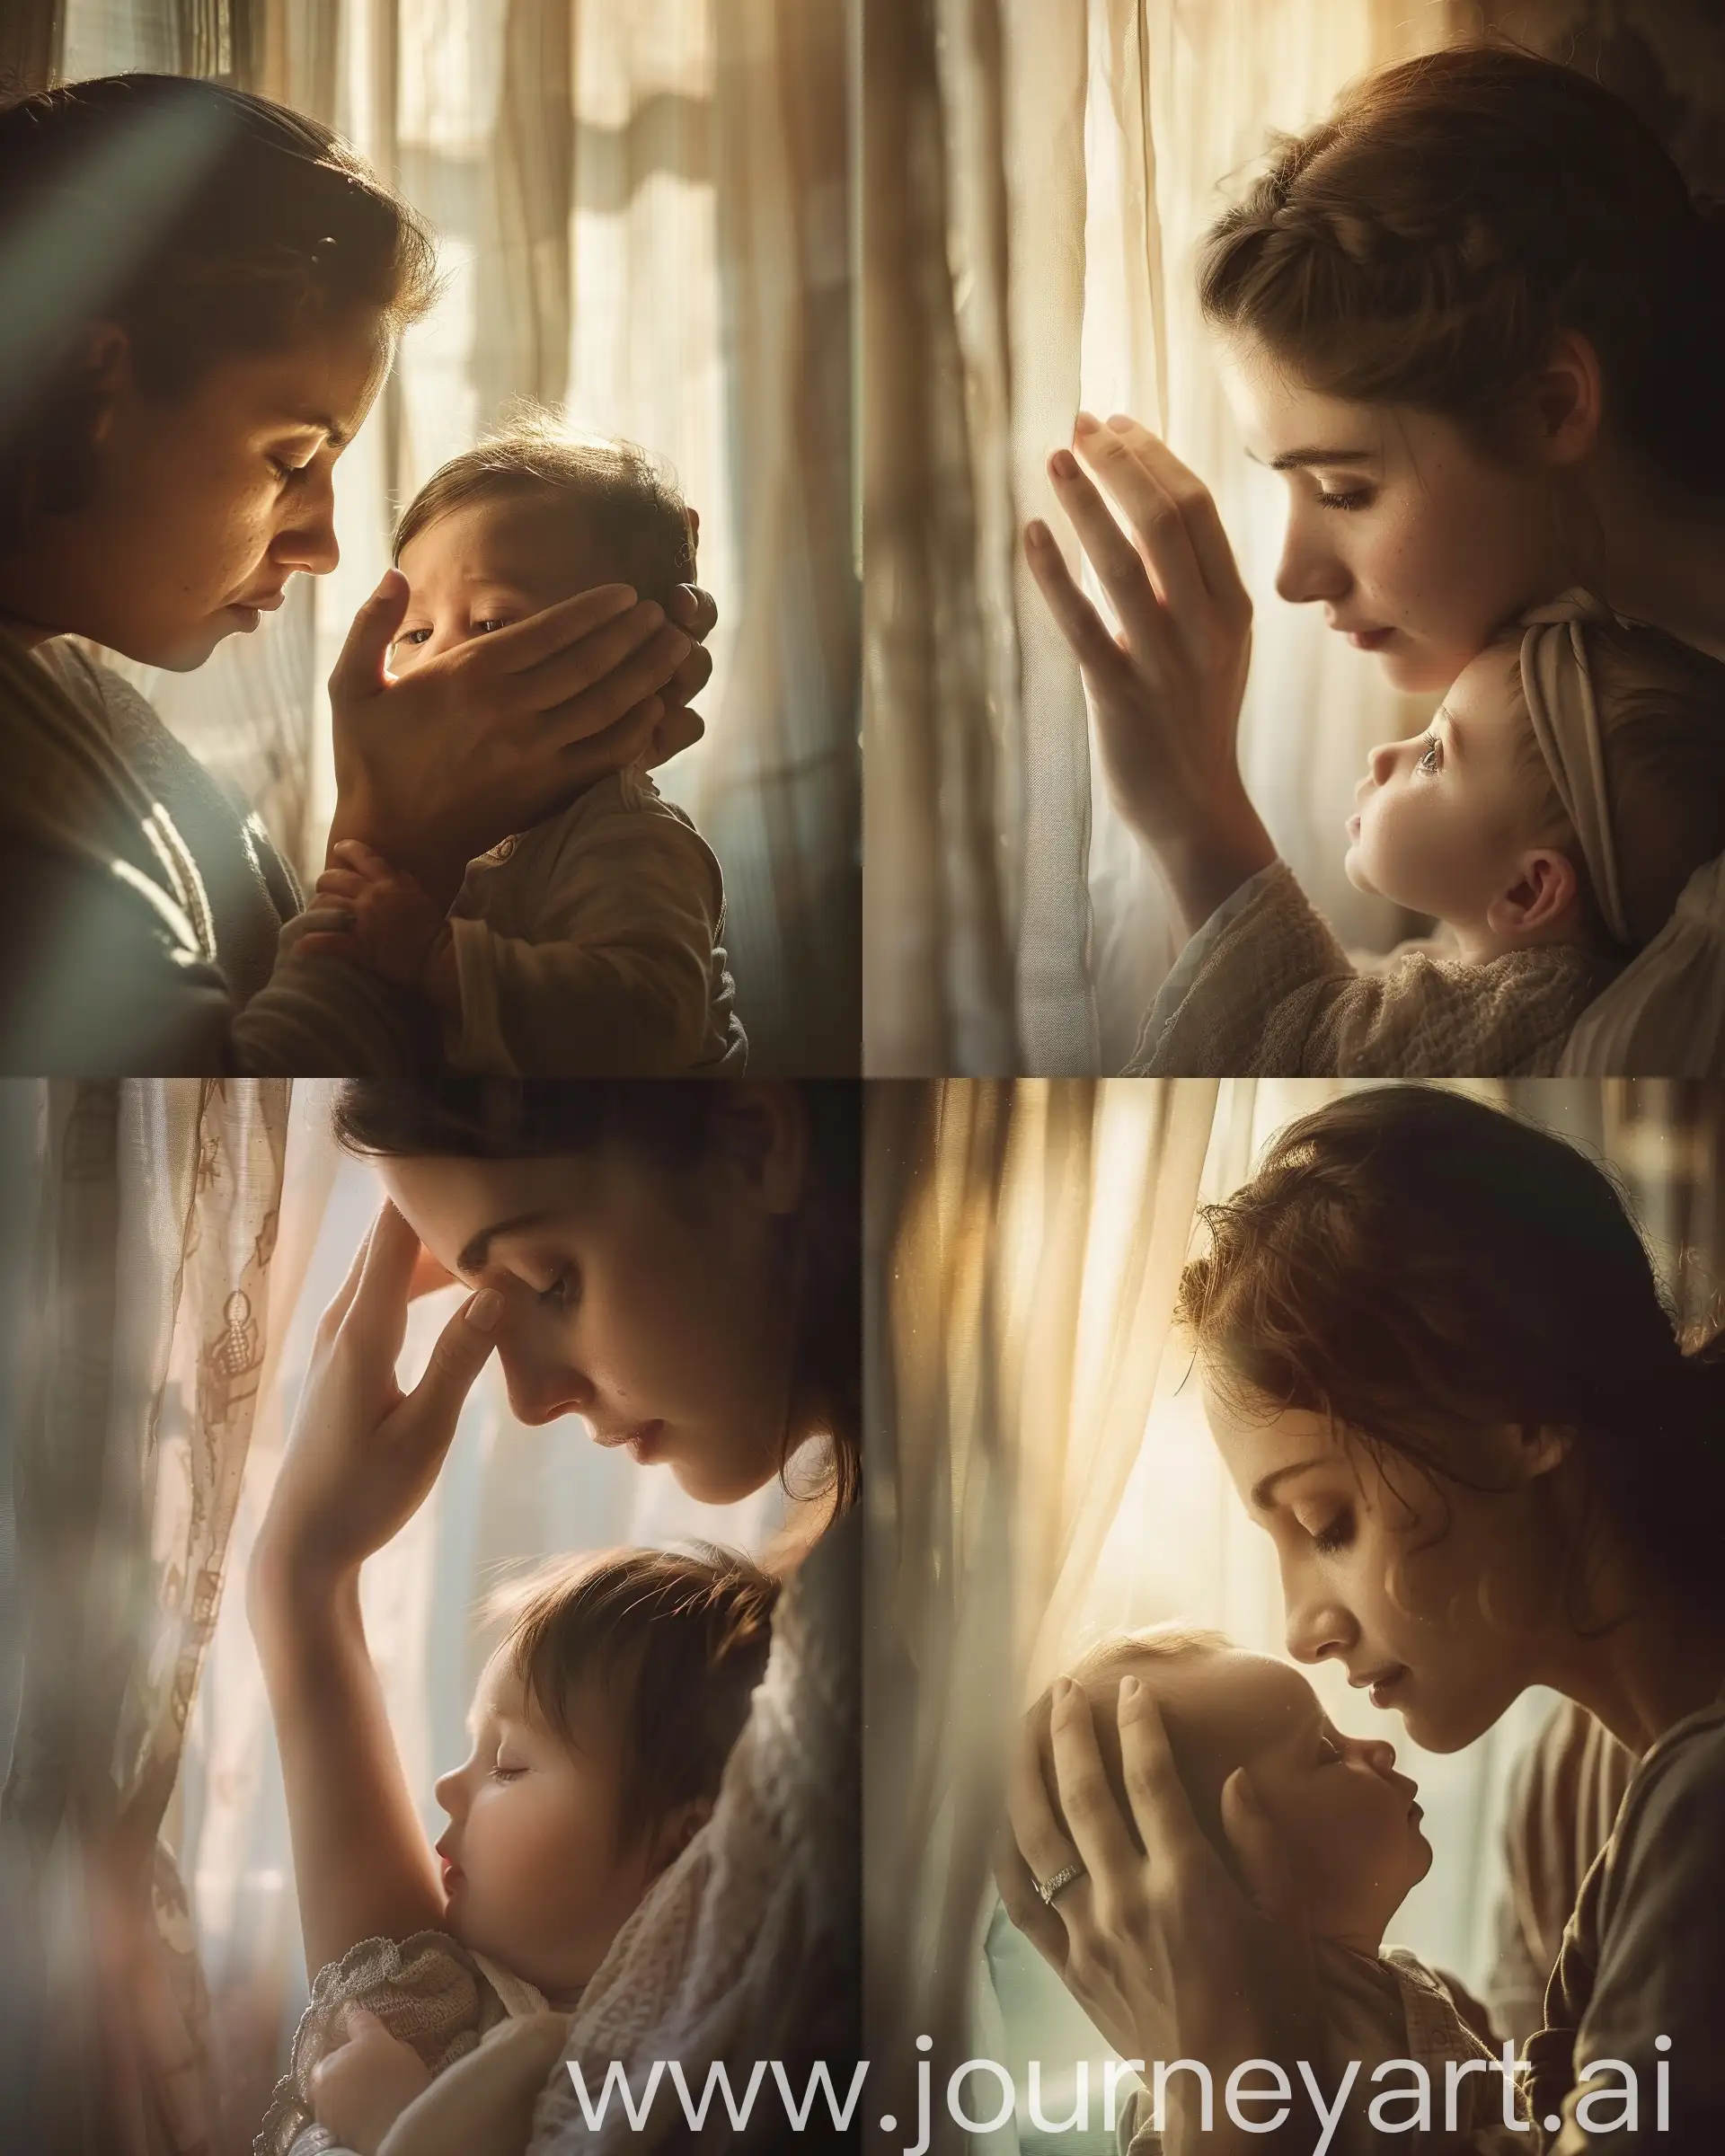  A heartfelt moment as a mother delicately places her palm on a baby's warm forehead, soft sunlight filtering through curtains, capturing the tenderness in the mother's eyes, emphasizing the baby's vulnerability, Photography, with a Canon EOS 5D Mark IV, 50mm lens, f/2.8 aperture, --ar 4:5